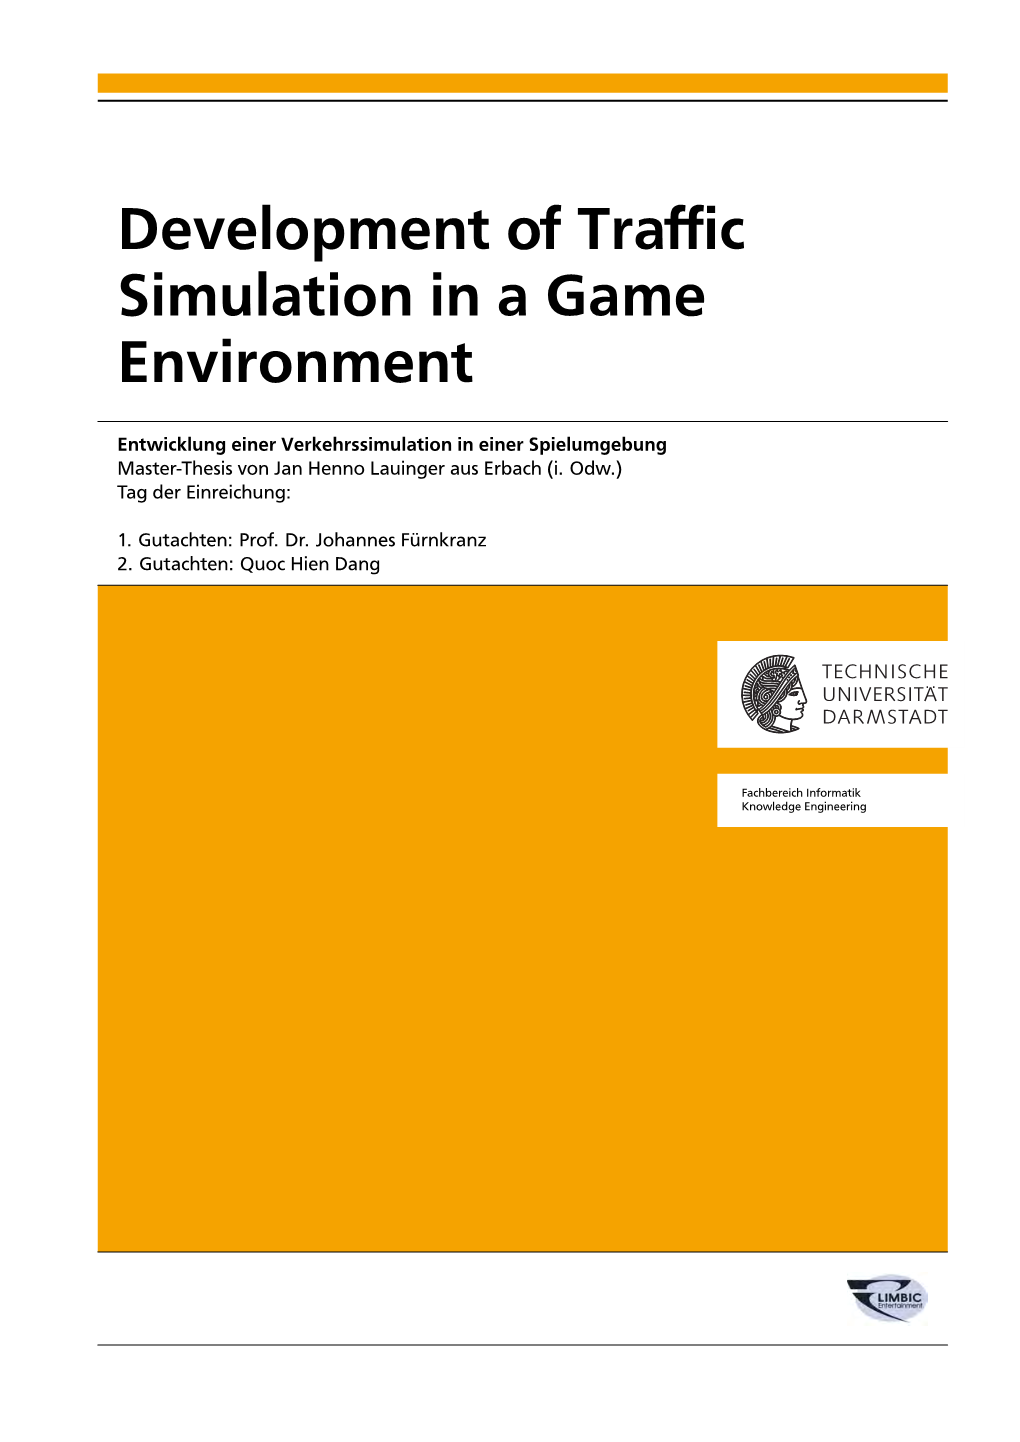 Development of Traffic Simulation in a Game Environment